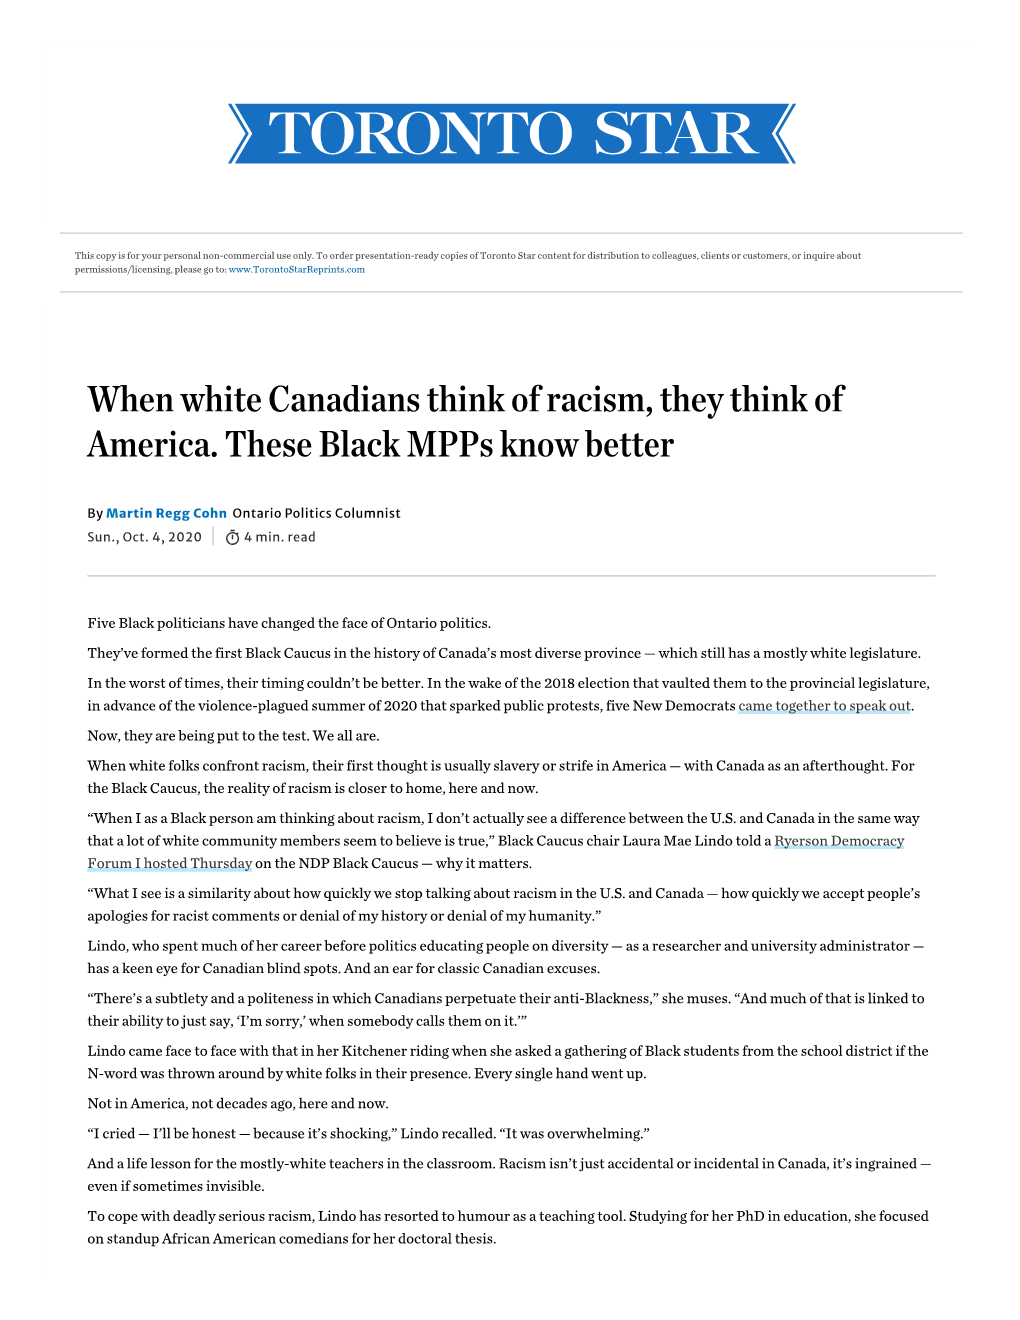 When White Canadians Think of Racism, They Think of America. These Black Mpps Know Better